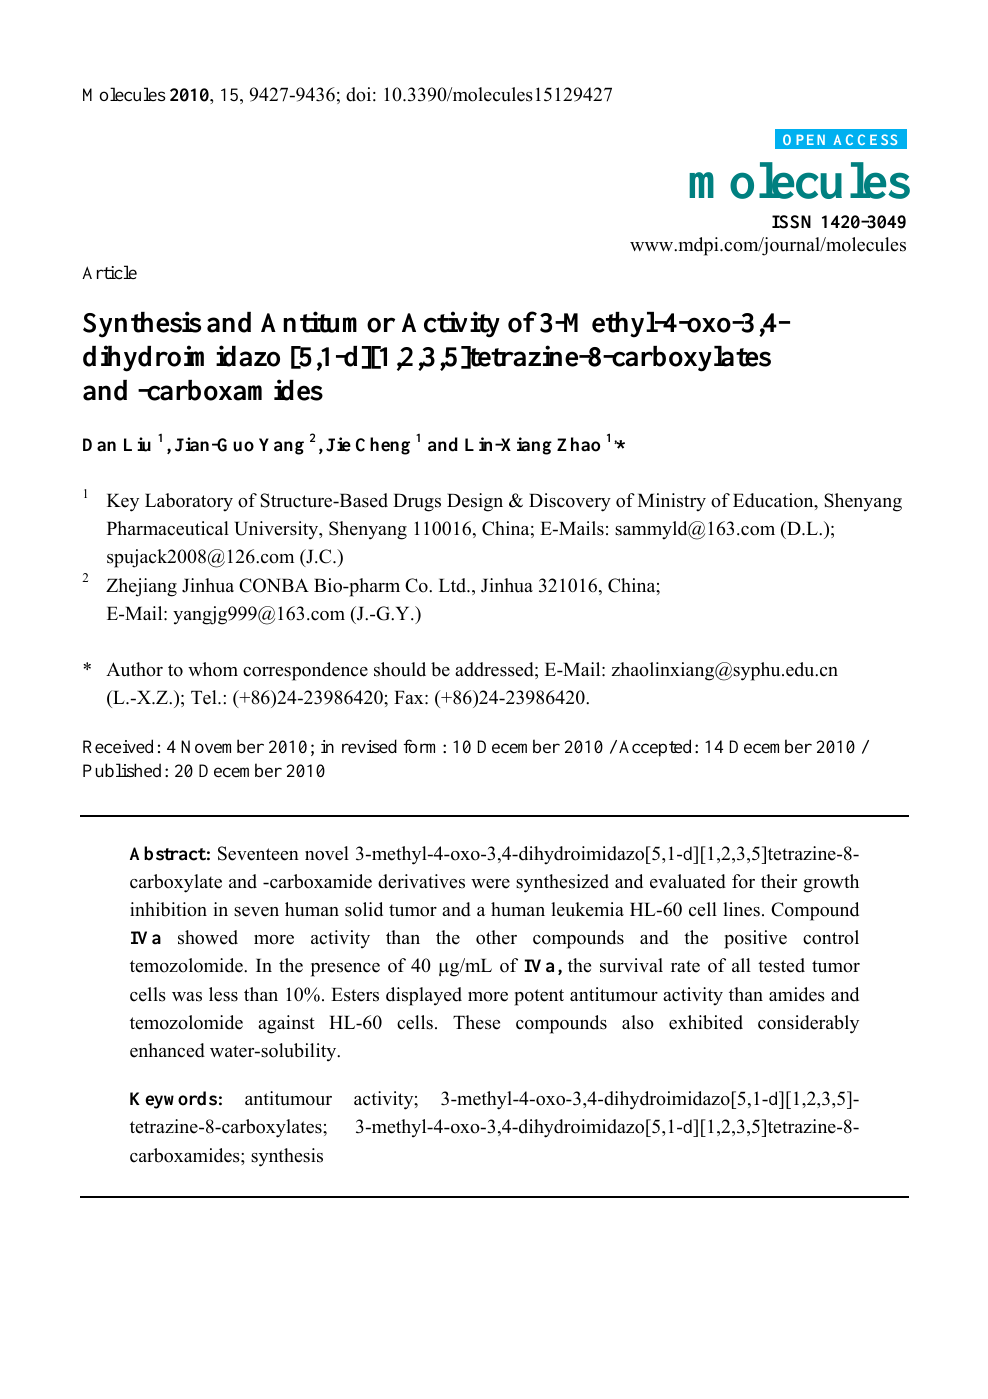 Synthesis And Antitumor Activity Of 3 Methyl 4 Oxo 3 4 Dihydroimidazo 5 1 D 1 2 3 5 Tetrazine 8 Carboxylates And Carboxamides Topic Of Research Paper In Chemical Sciences Download Scholarly Article Pdf And Read For Free On Cyberleninka Open